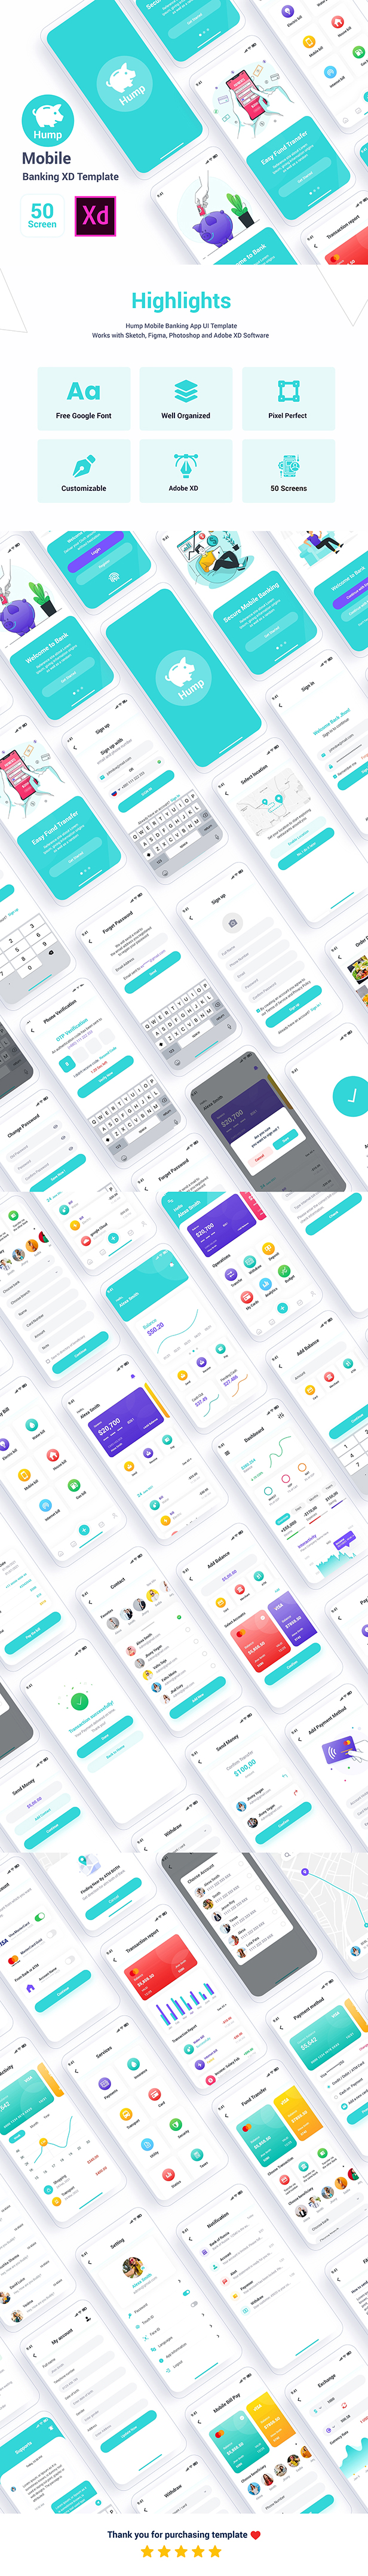 Hump – Mobile Banking Adobe XD Template - 1